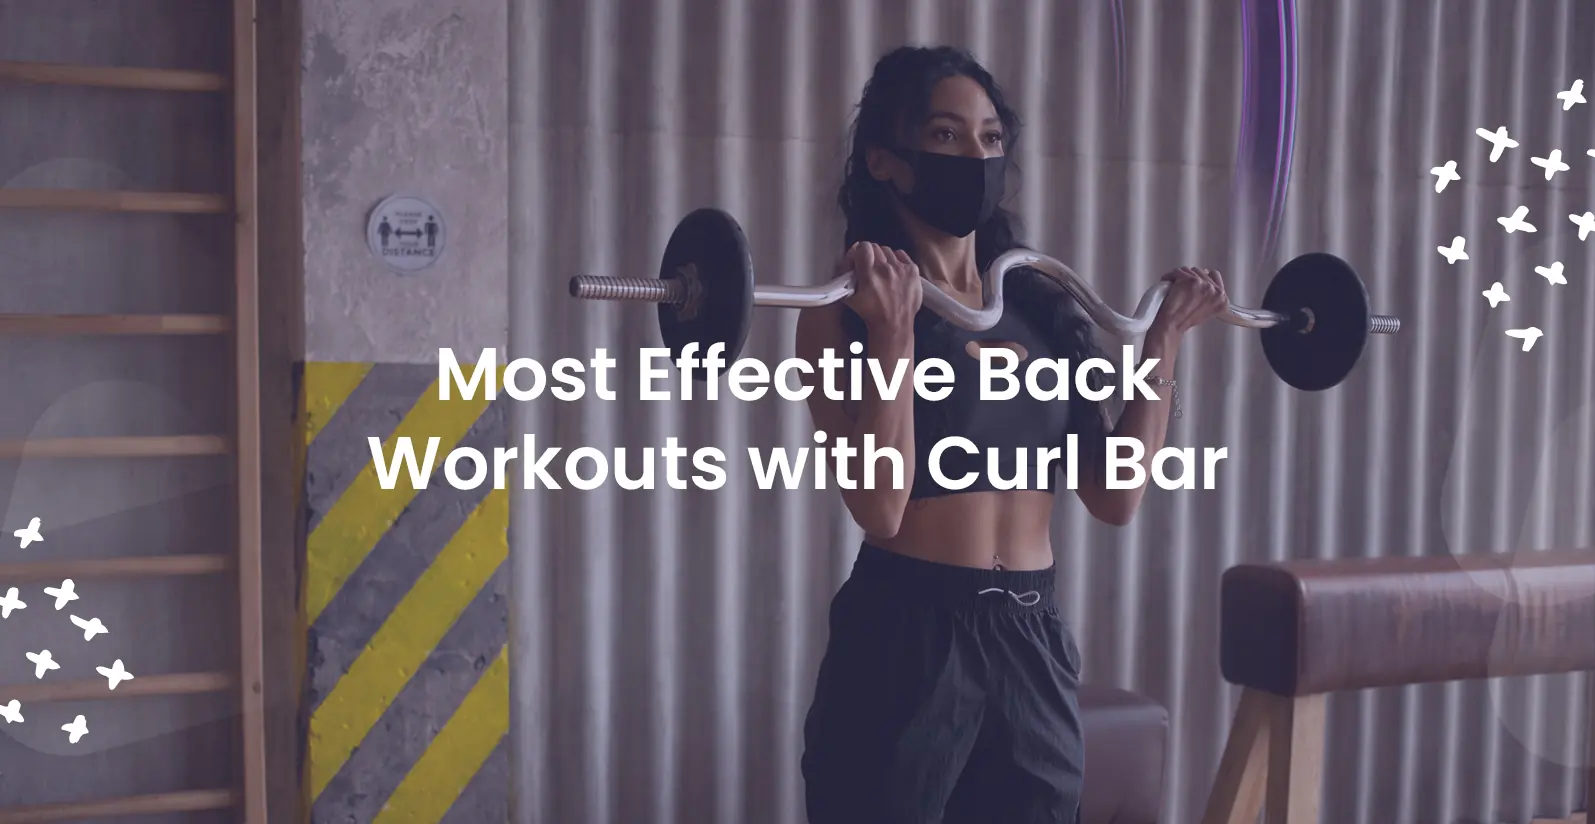 Most Effective Back Workouts with Curl Bar